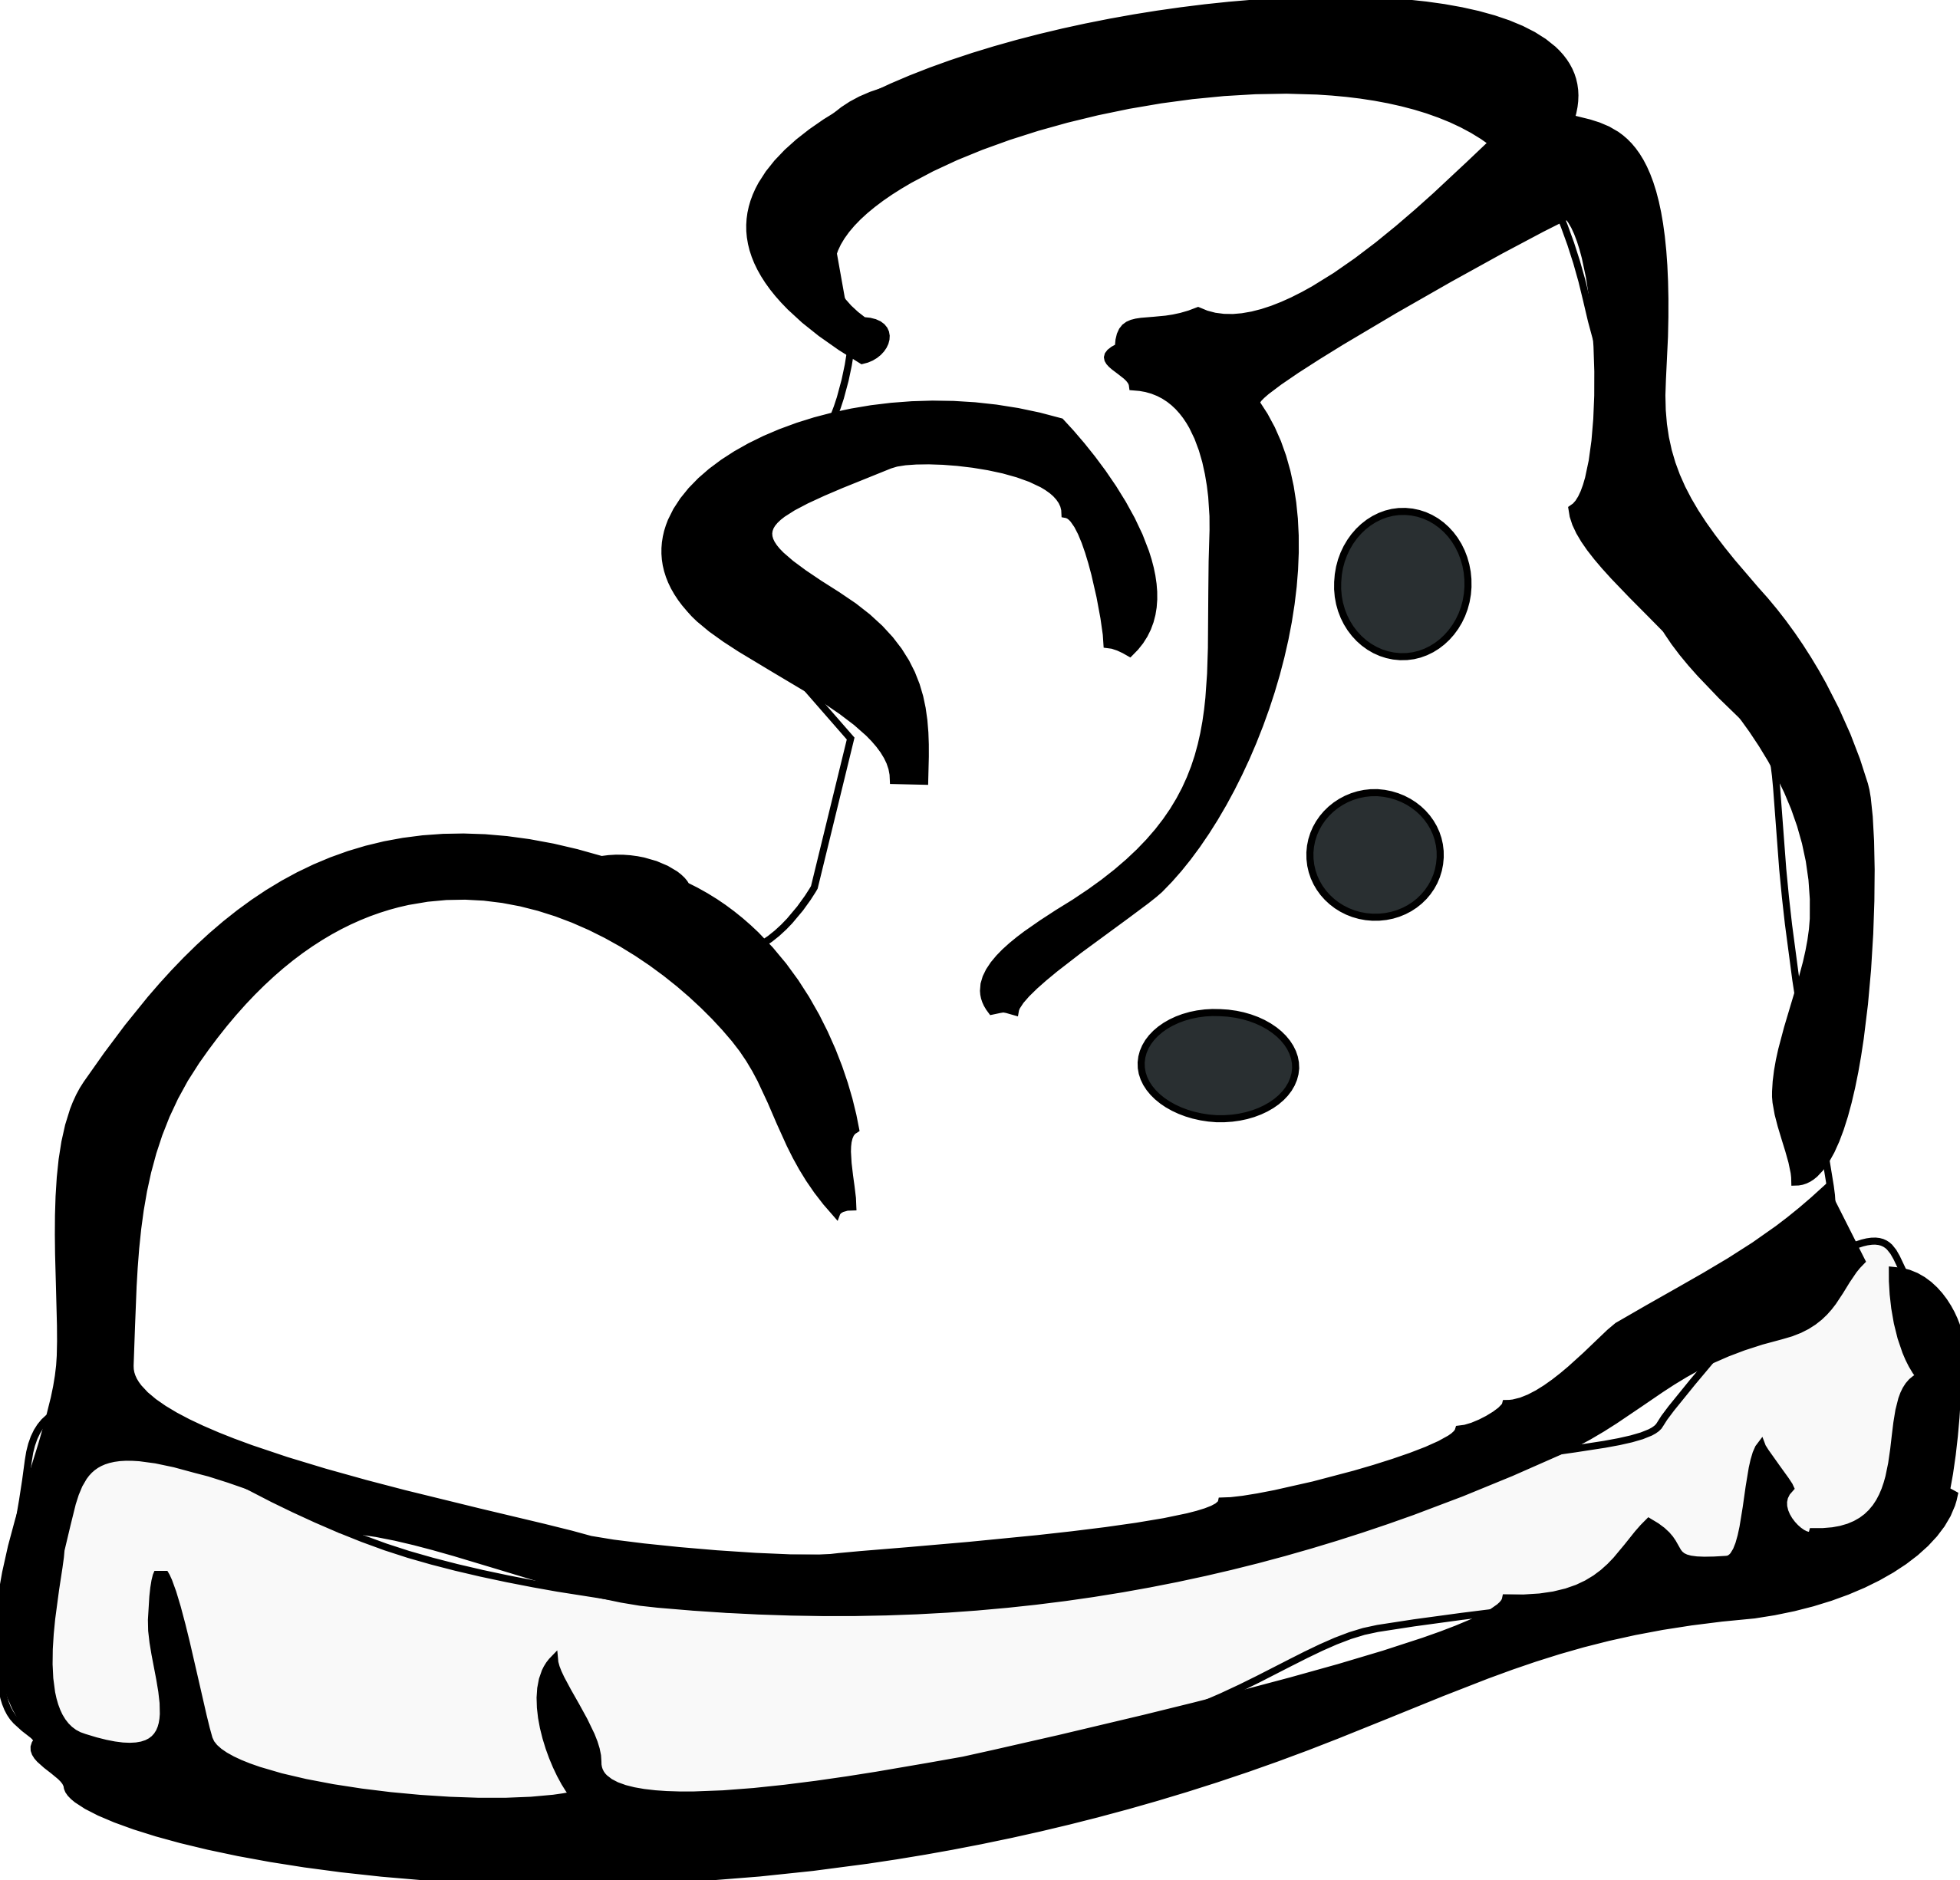 Free Vector Shoes, Download Free Vector Shoes png images, Free ClipArts on  Clipart Library